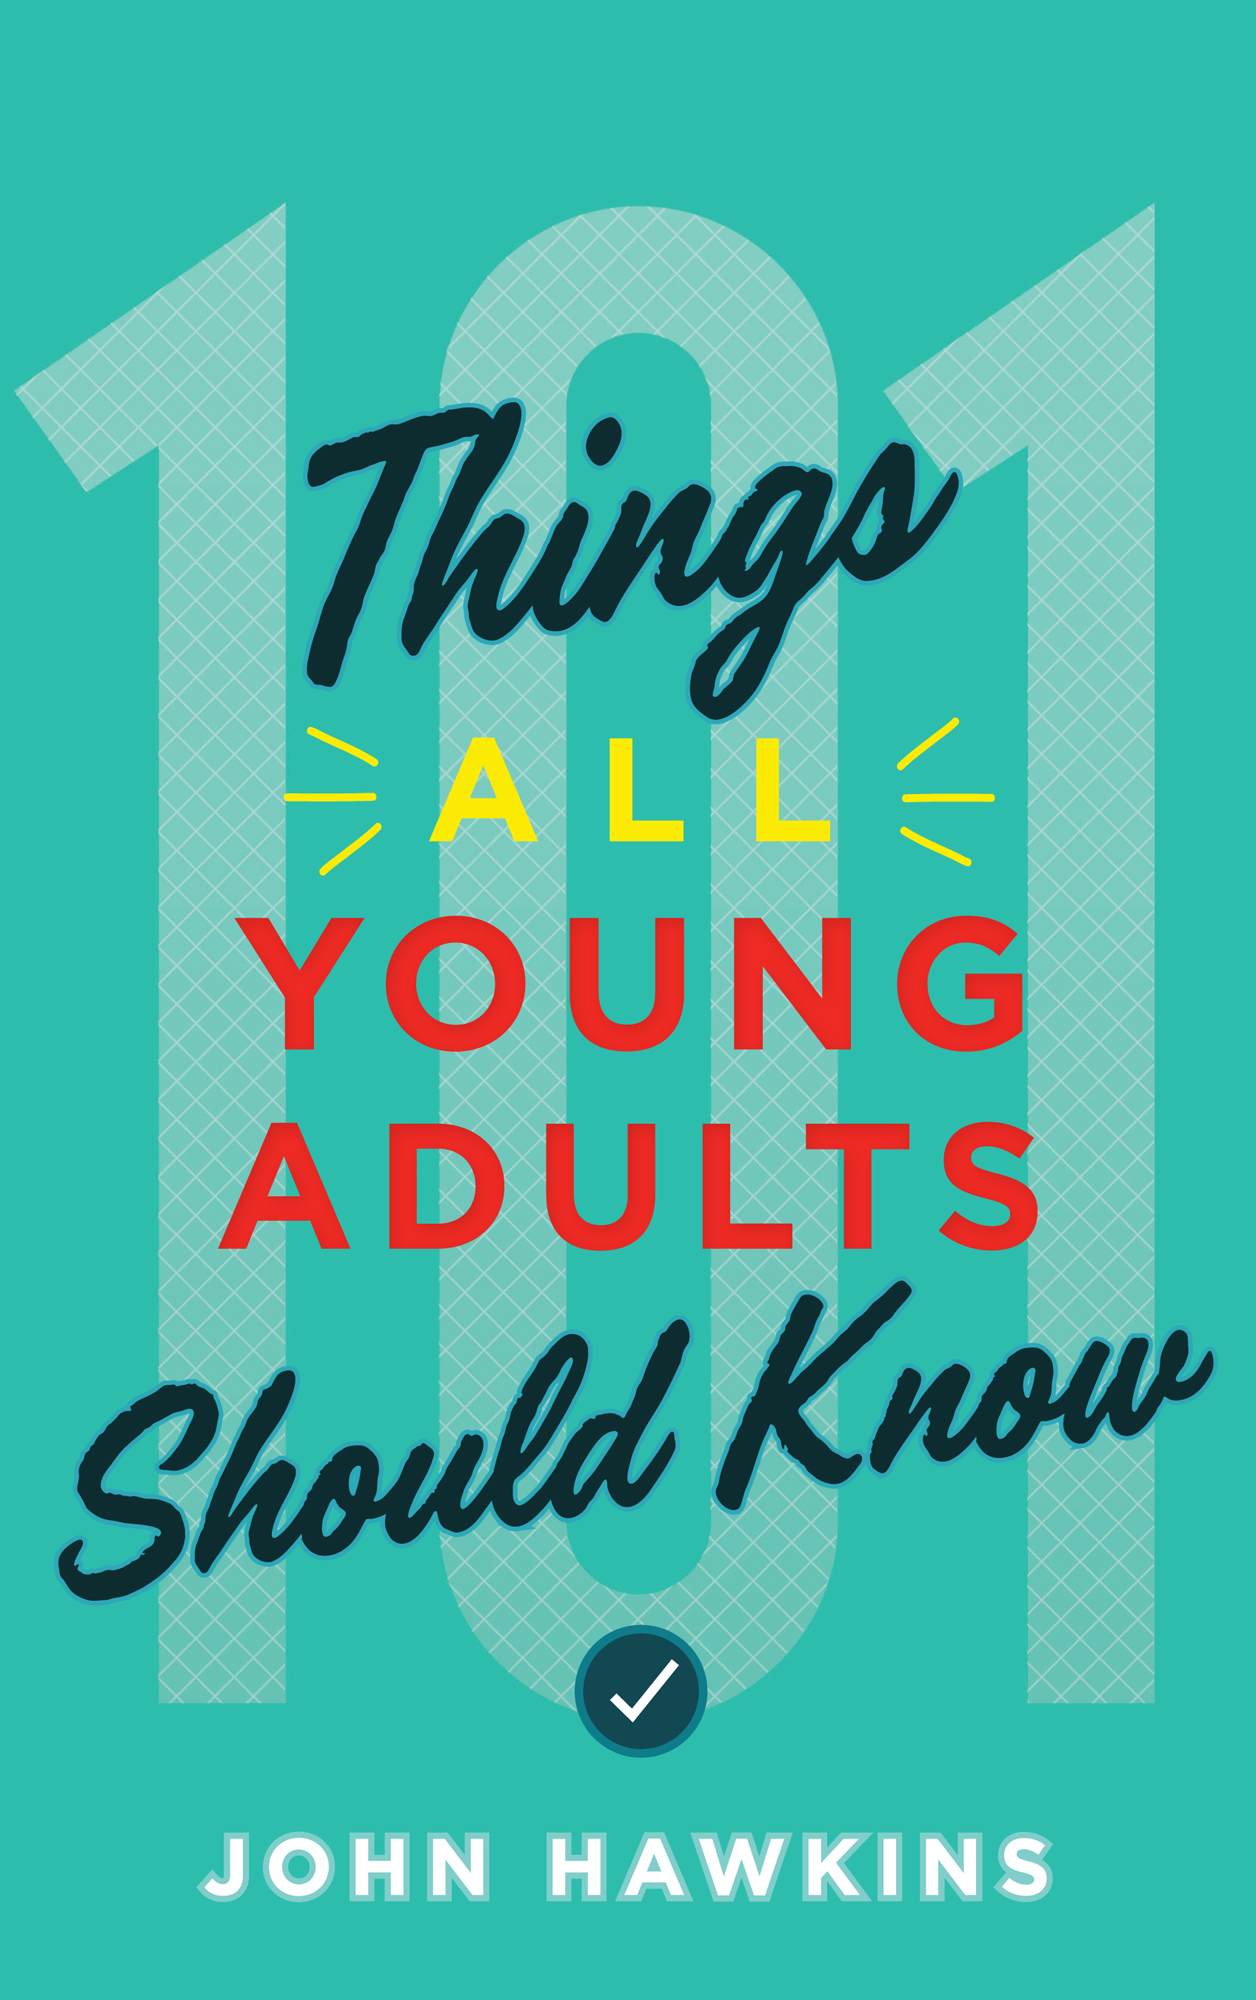 101 Things All Young Adults Should Know